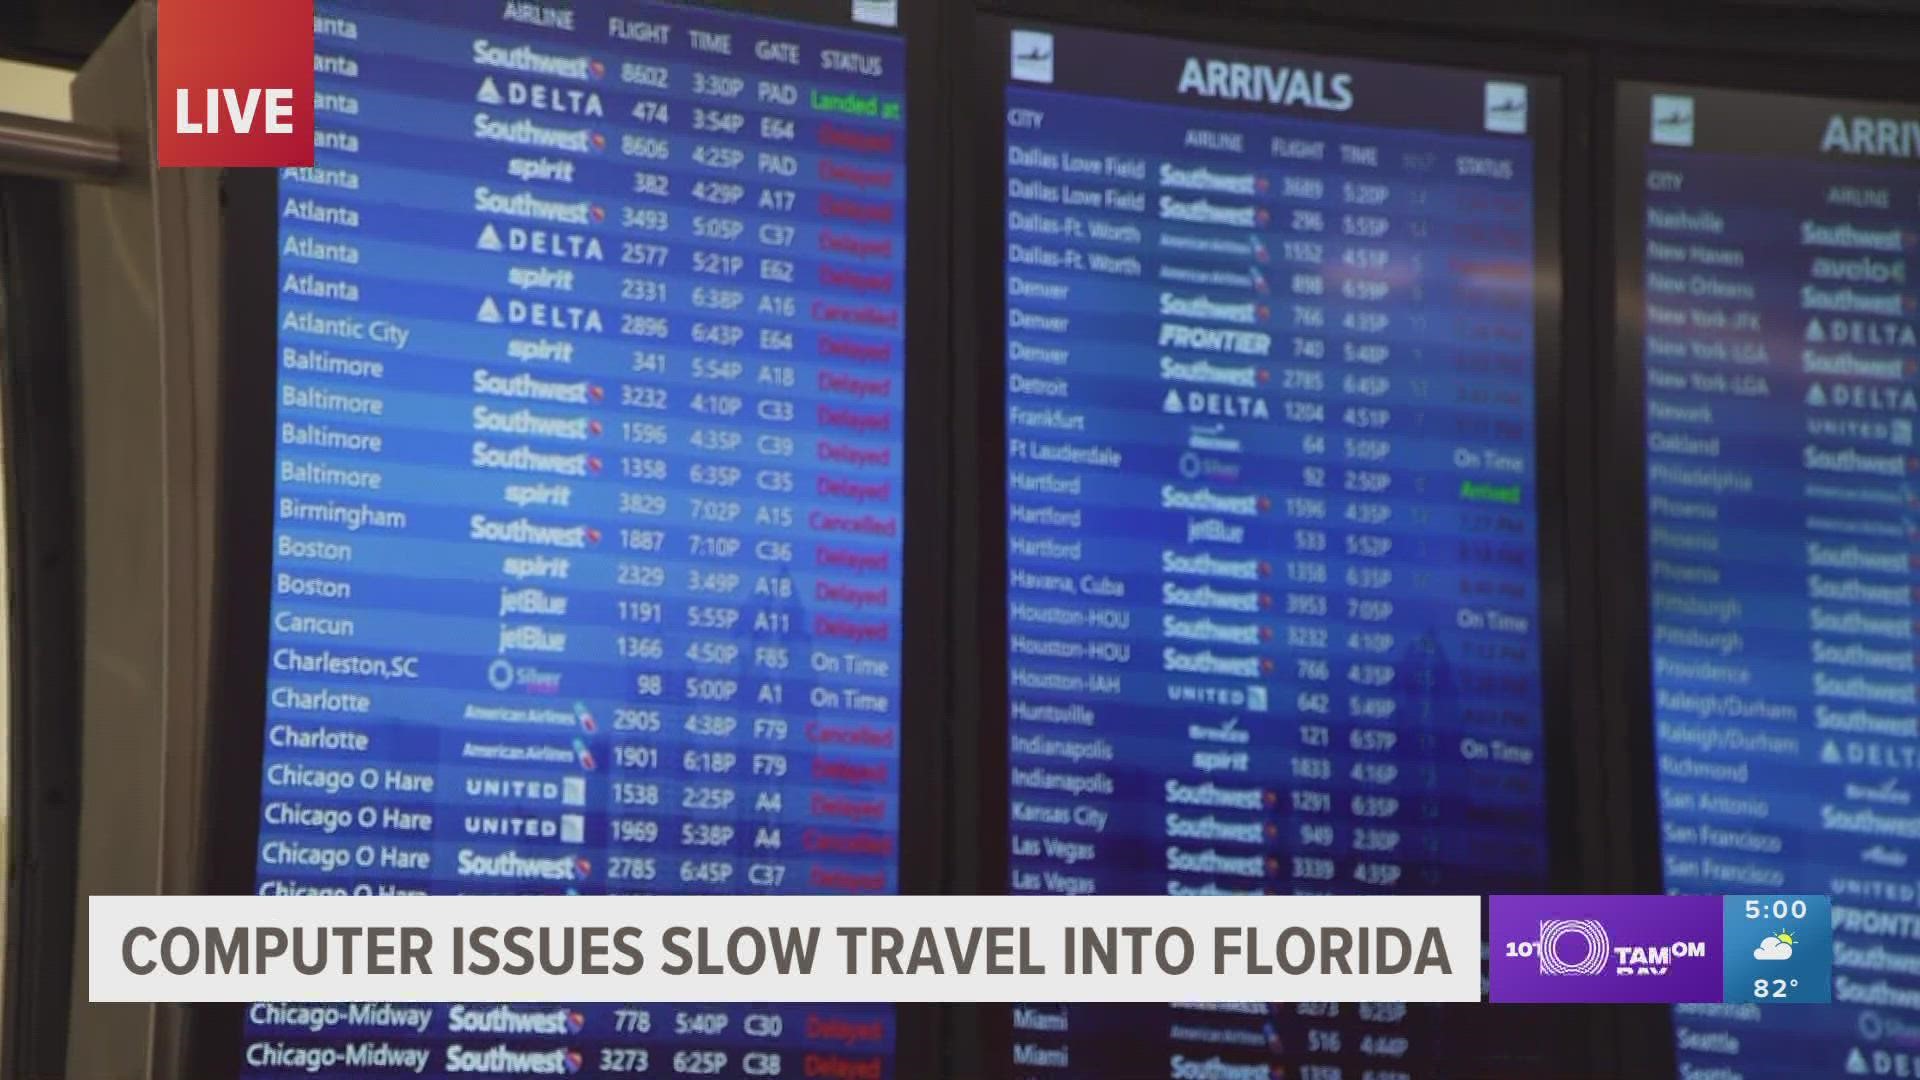 The FAA reduced the number of flights flying in and out of Florida on Monday afternoon, prompting an increase in flight delays and cancellations.